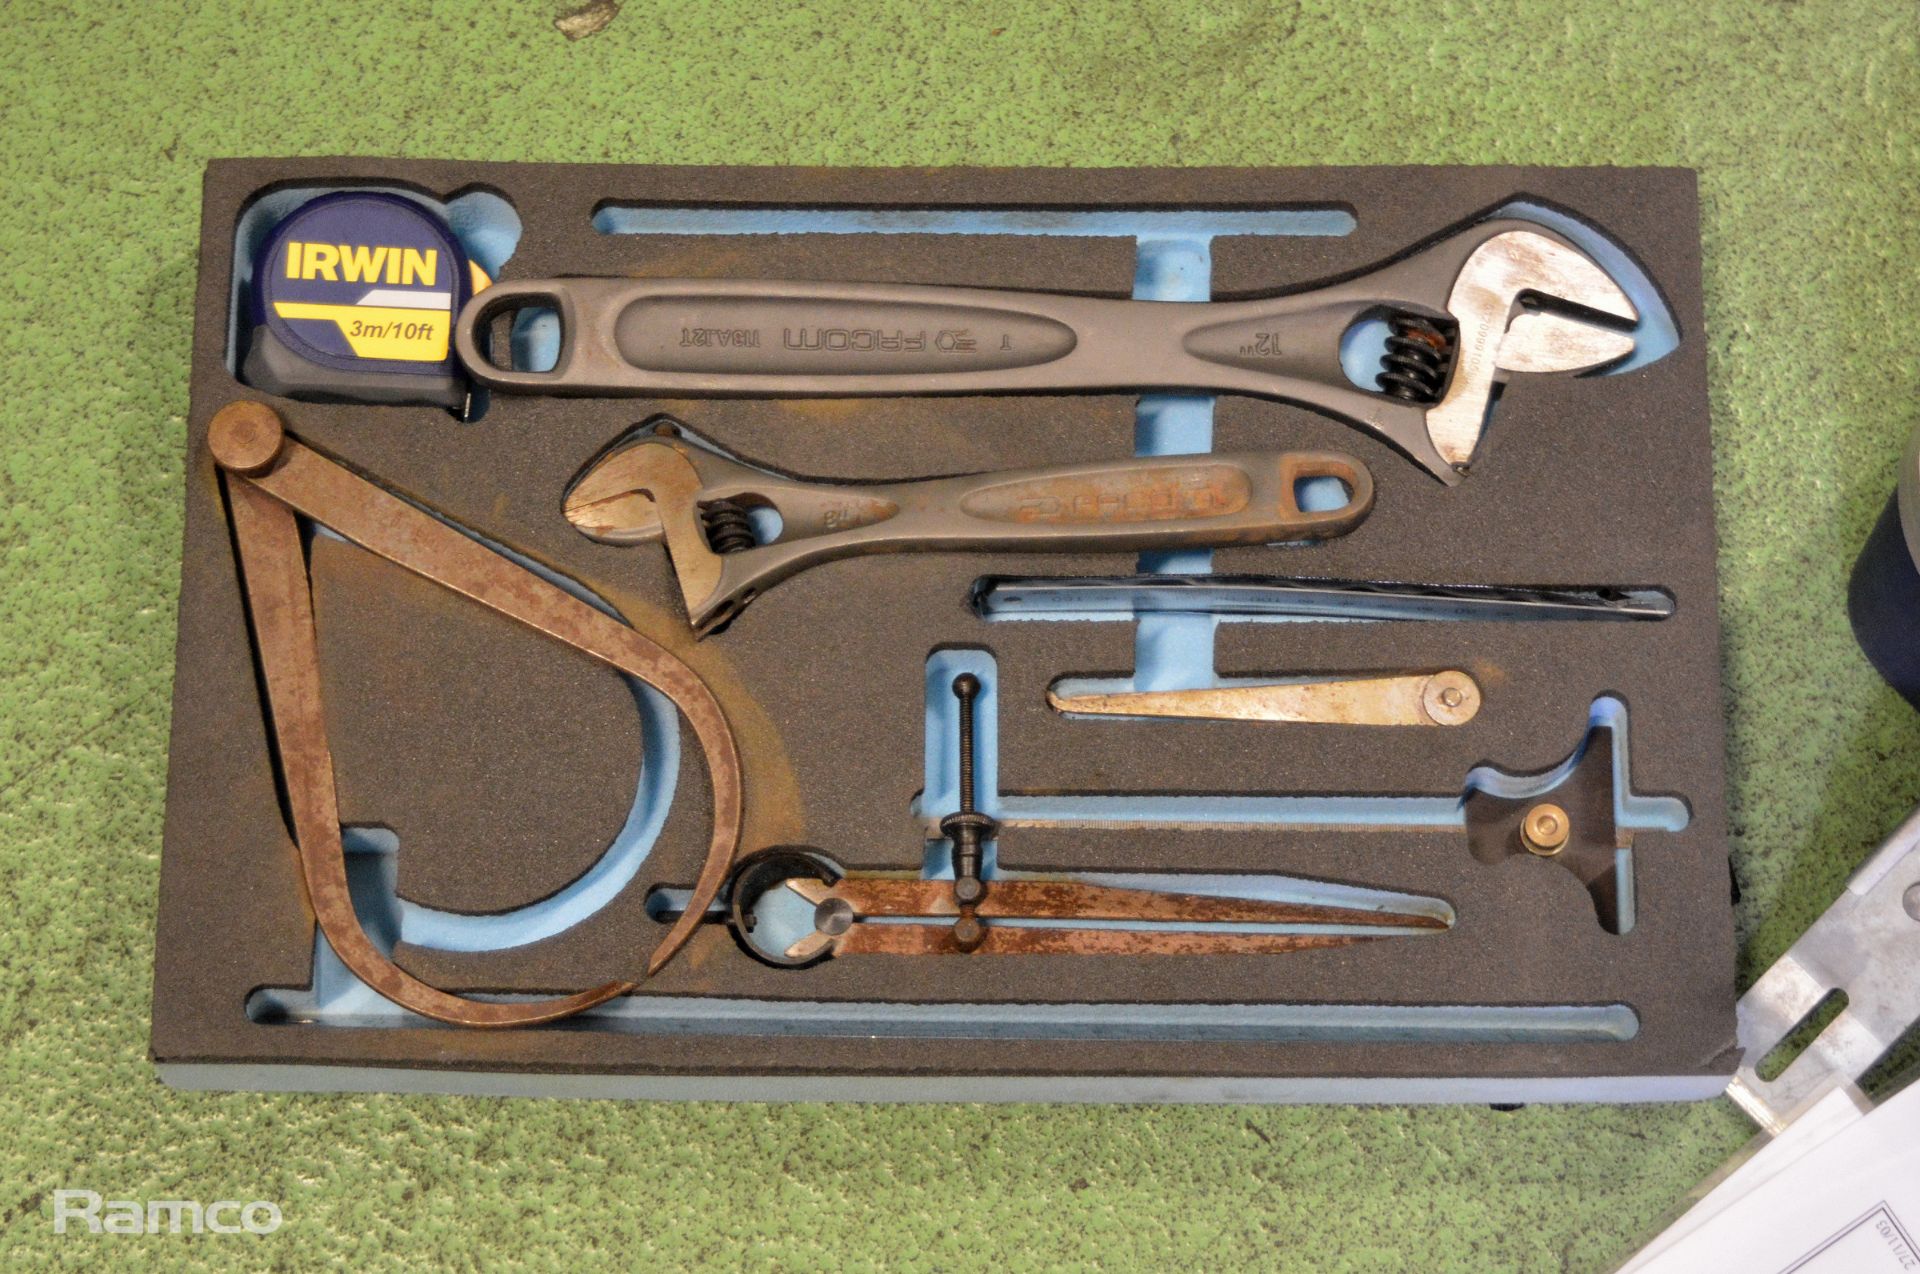 Toolbox with various tools - Image 2 of 5